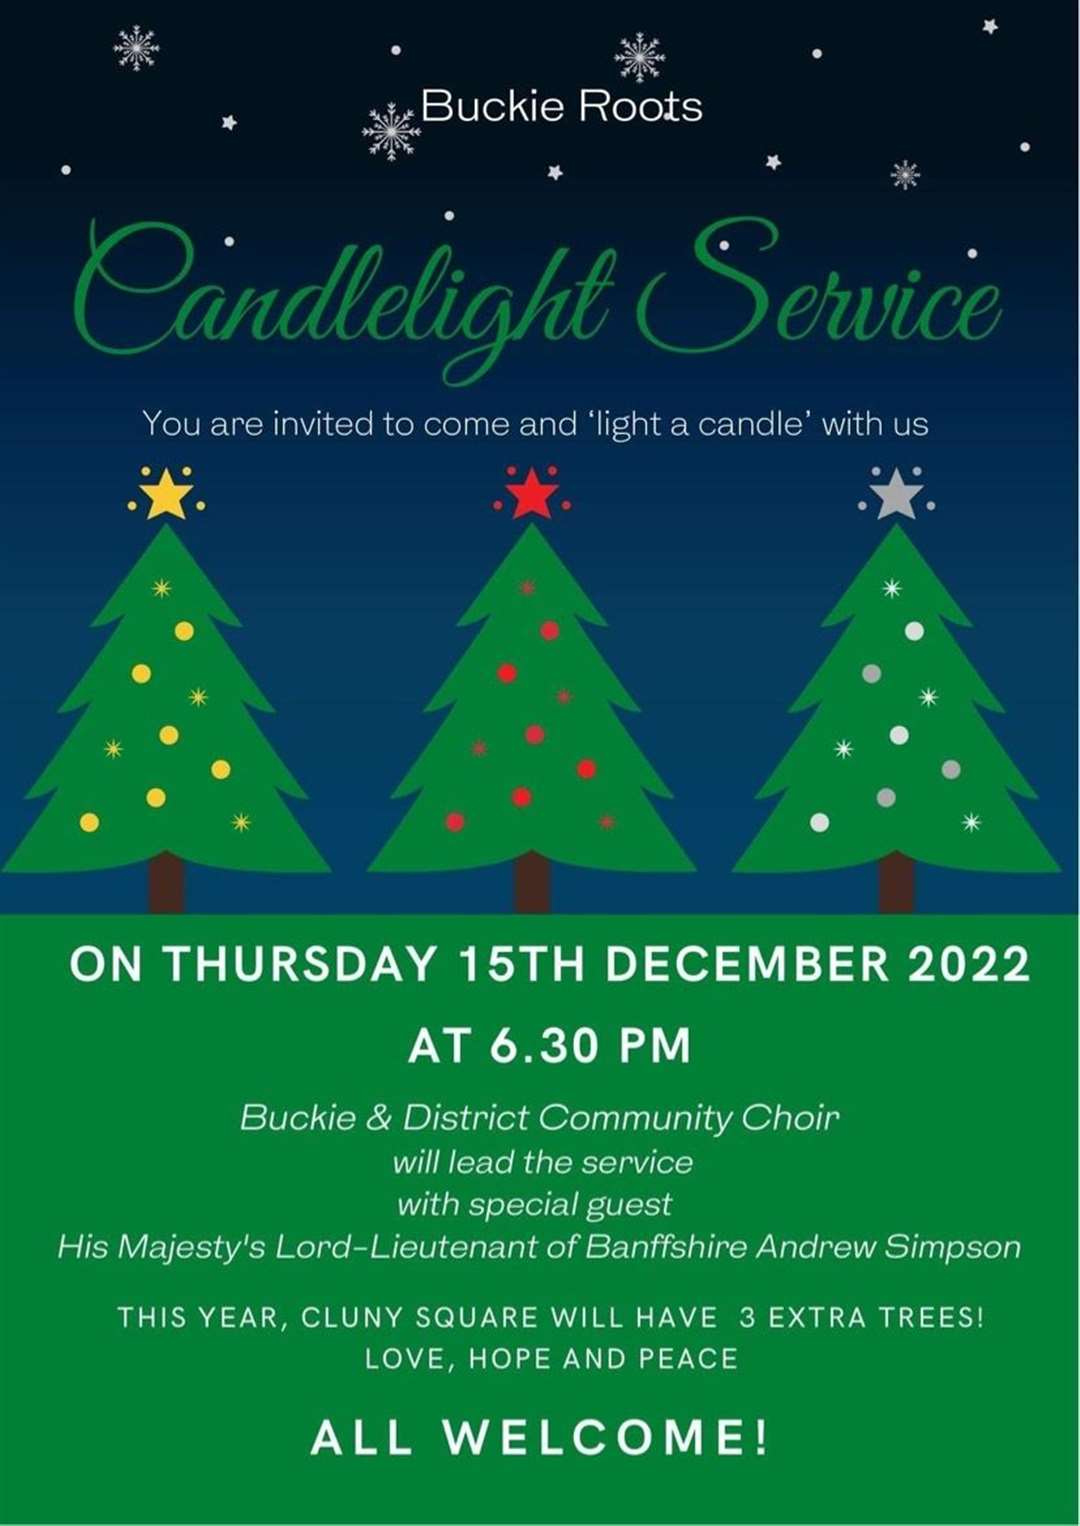 All are welcome at the Buckie candlelight service on December 15.